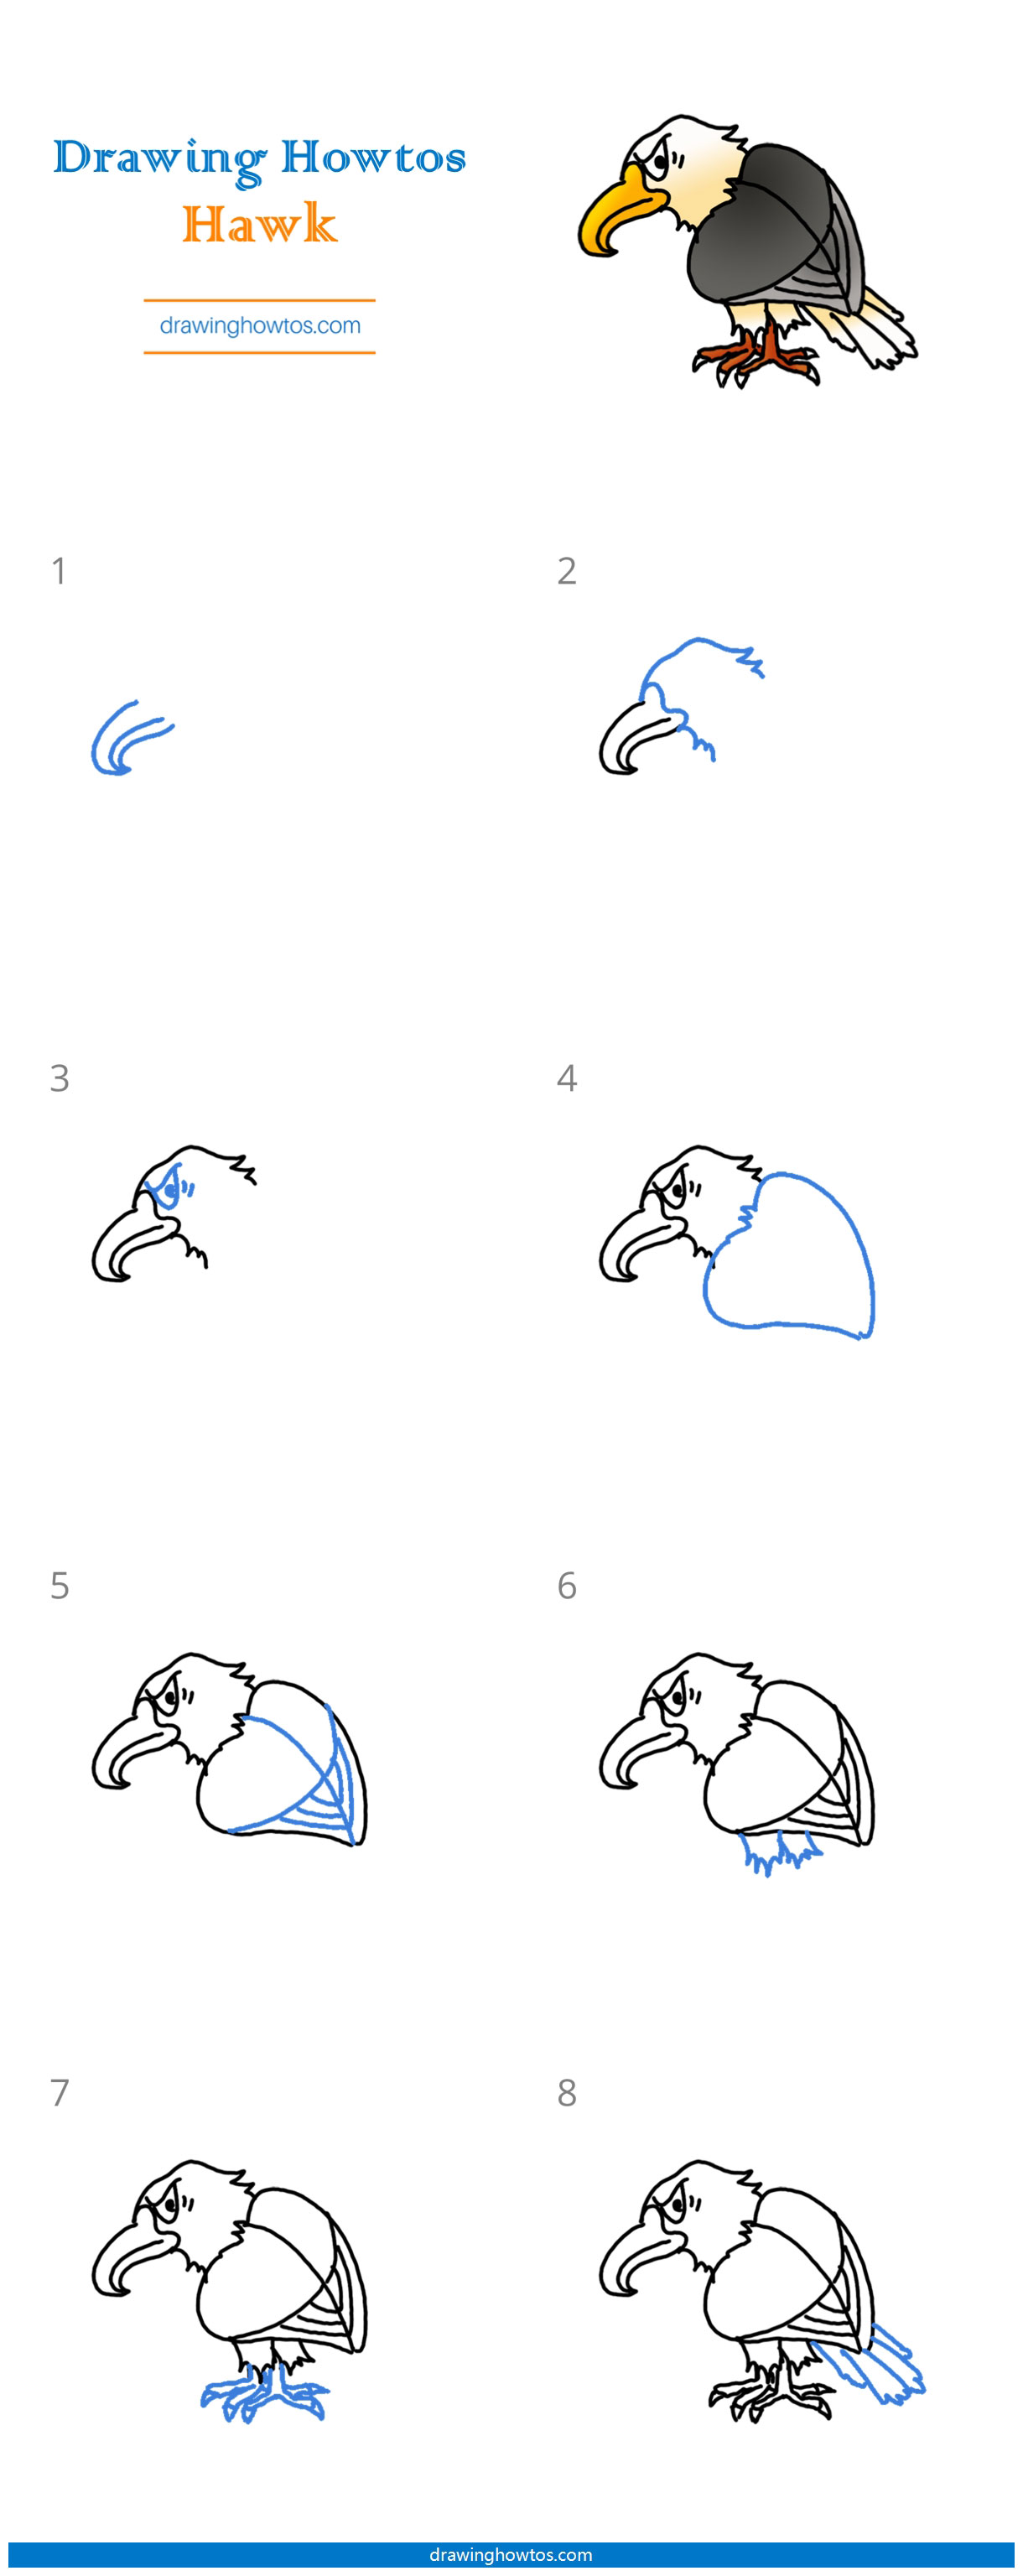 How to Draw a Hawk Step by Step